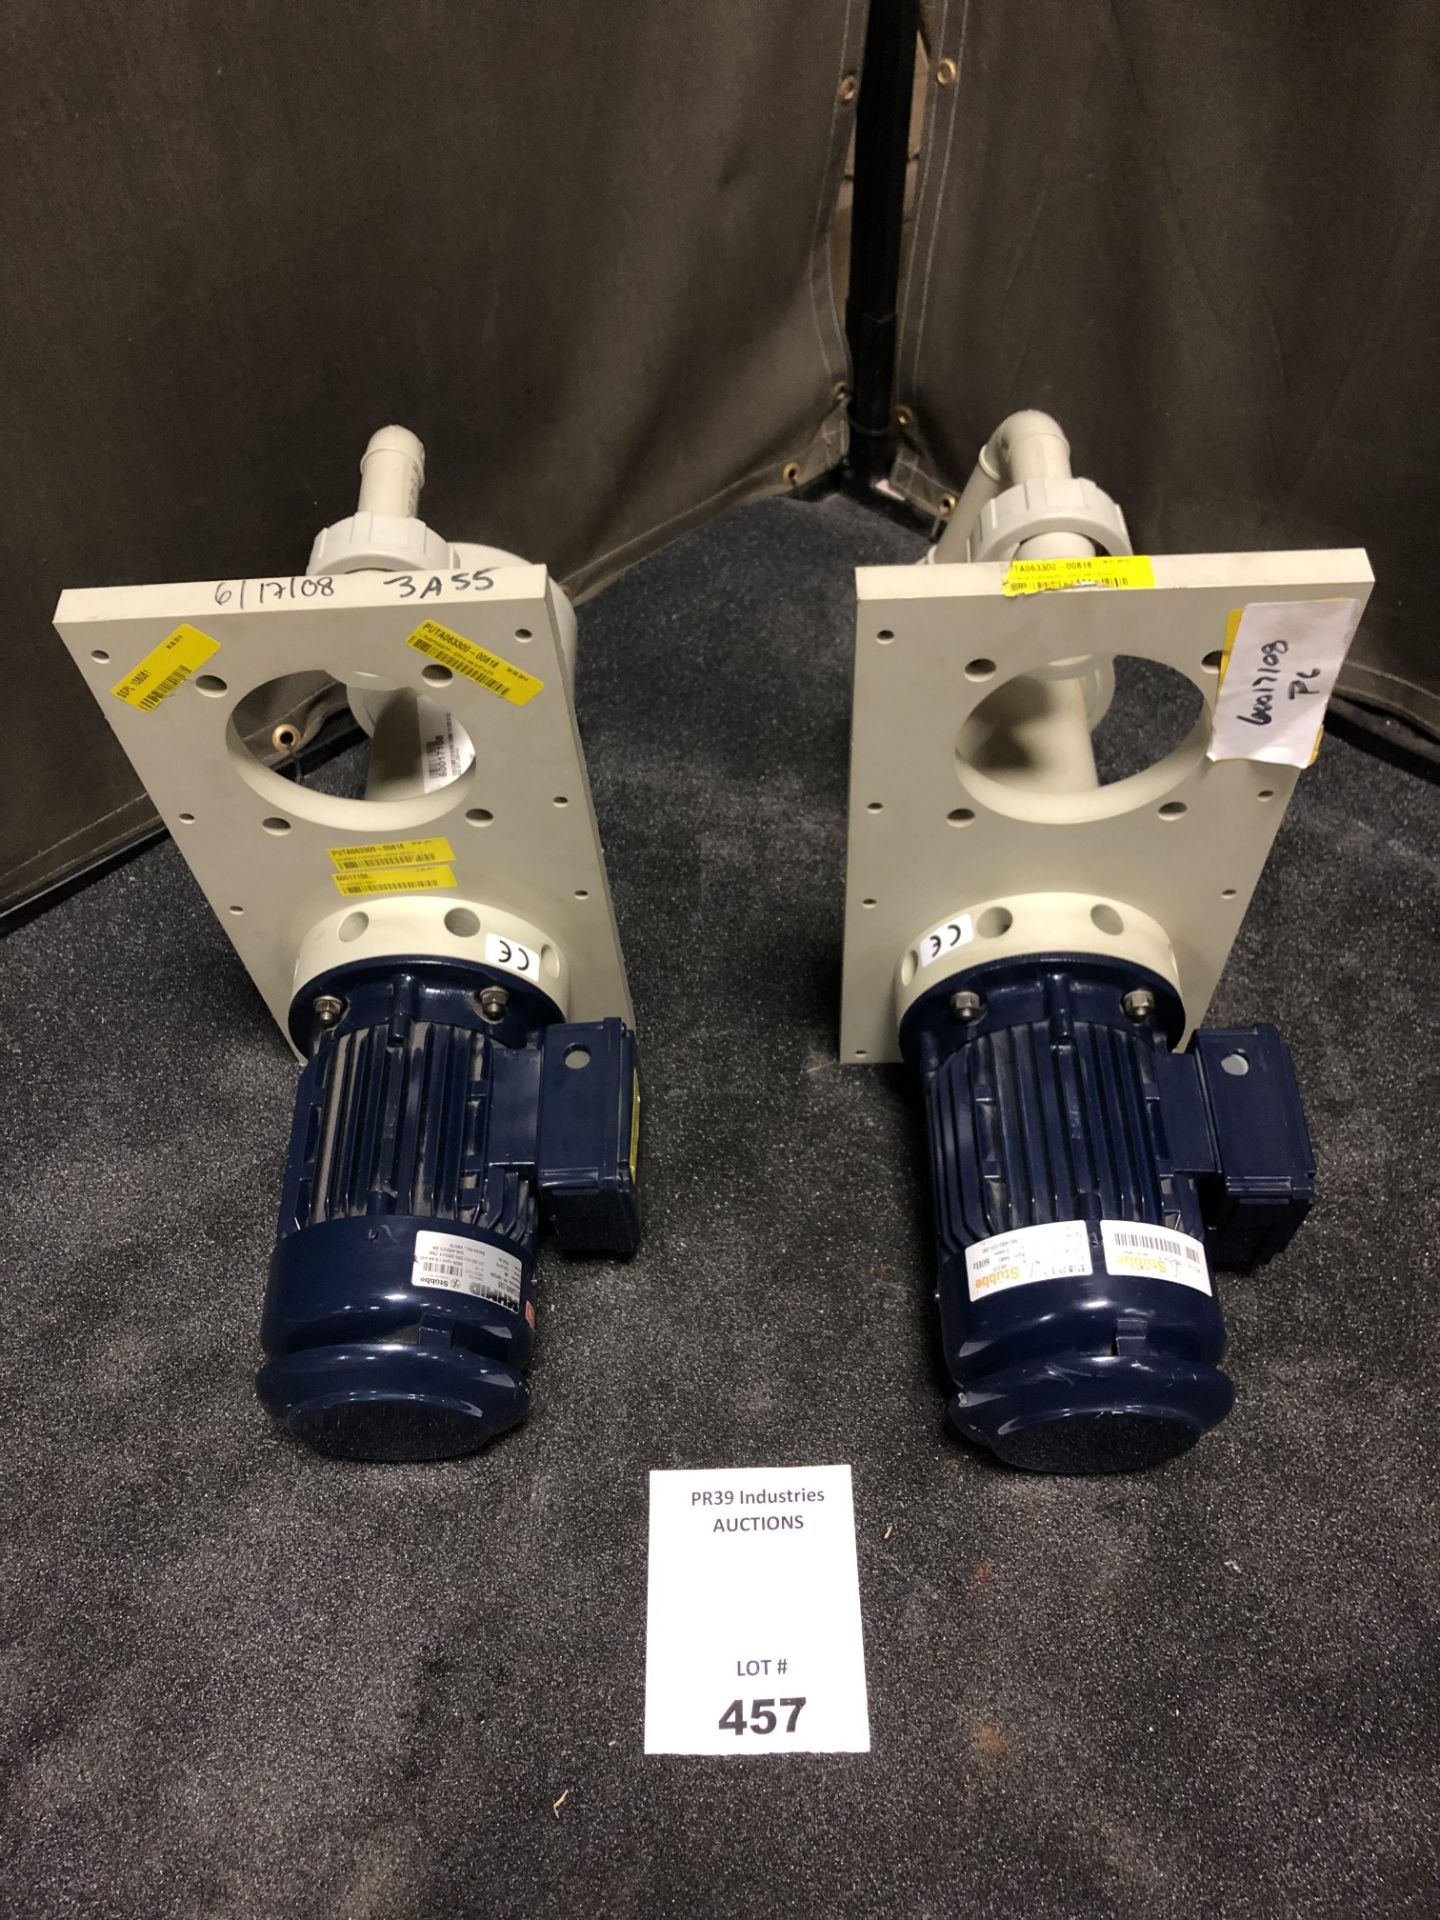 LOT OF 2 - SCHMID BY STUBBE ETLB-25-125 VERTICAL SINGLE-STAGE IMMERSION PUMP, 0.44kw, Qmax = 3.5 M3/